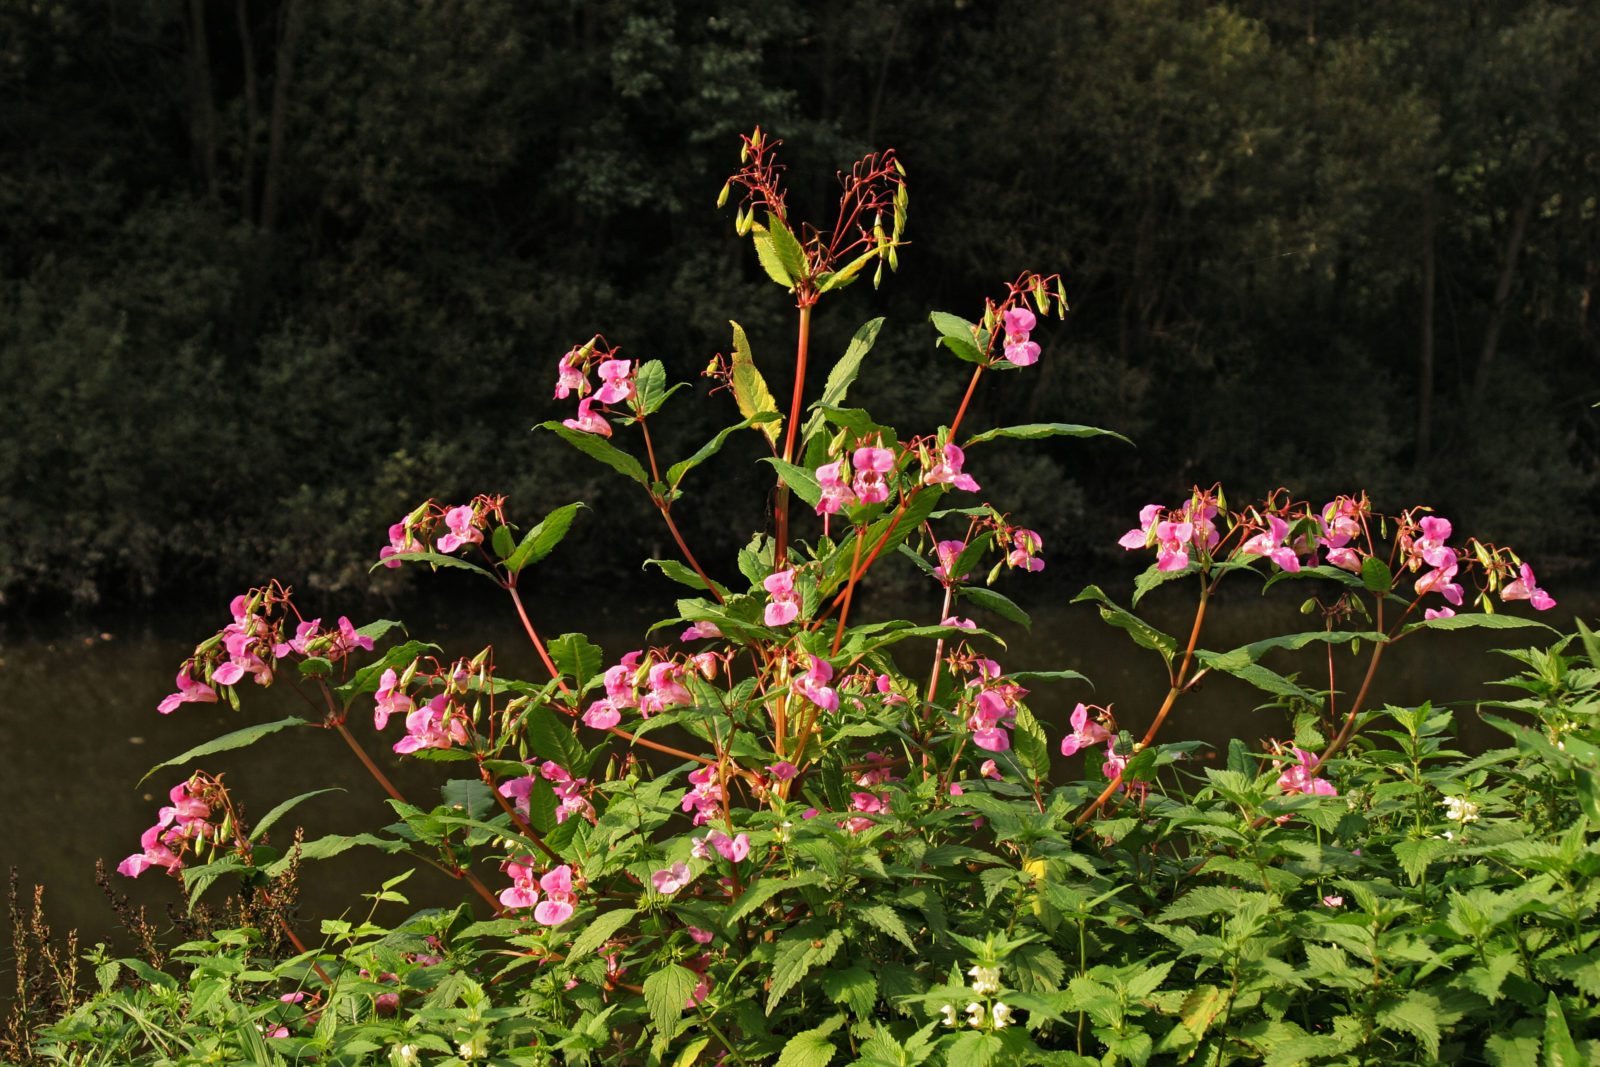 himalayan balsam identification, flowers from june to october.